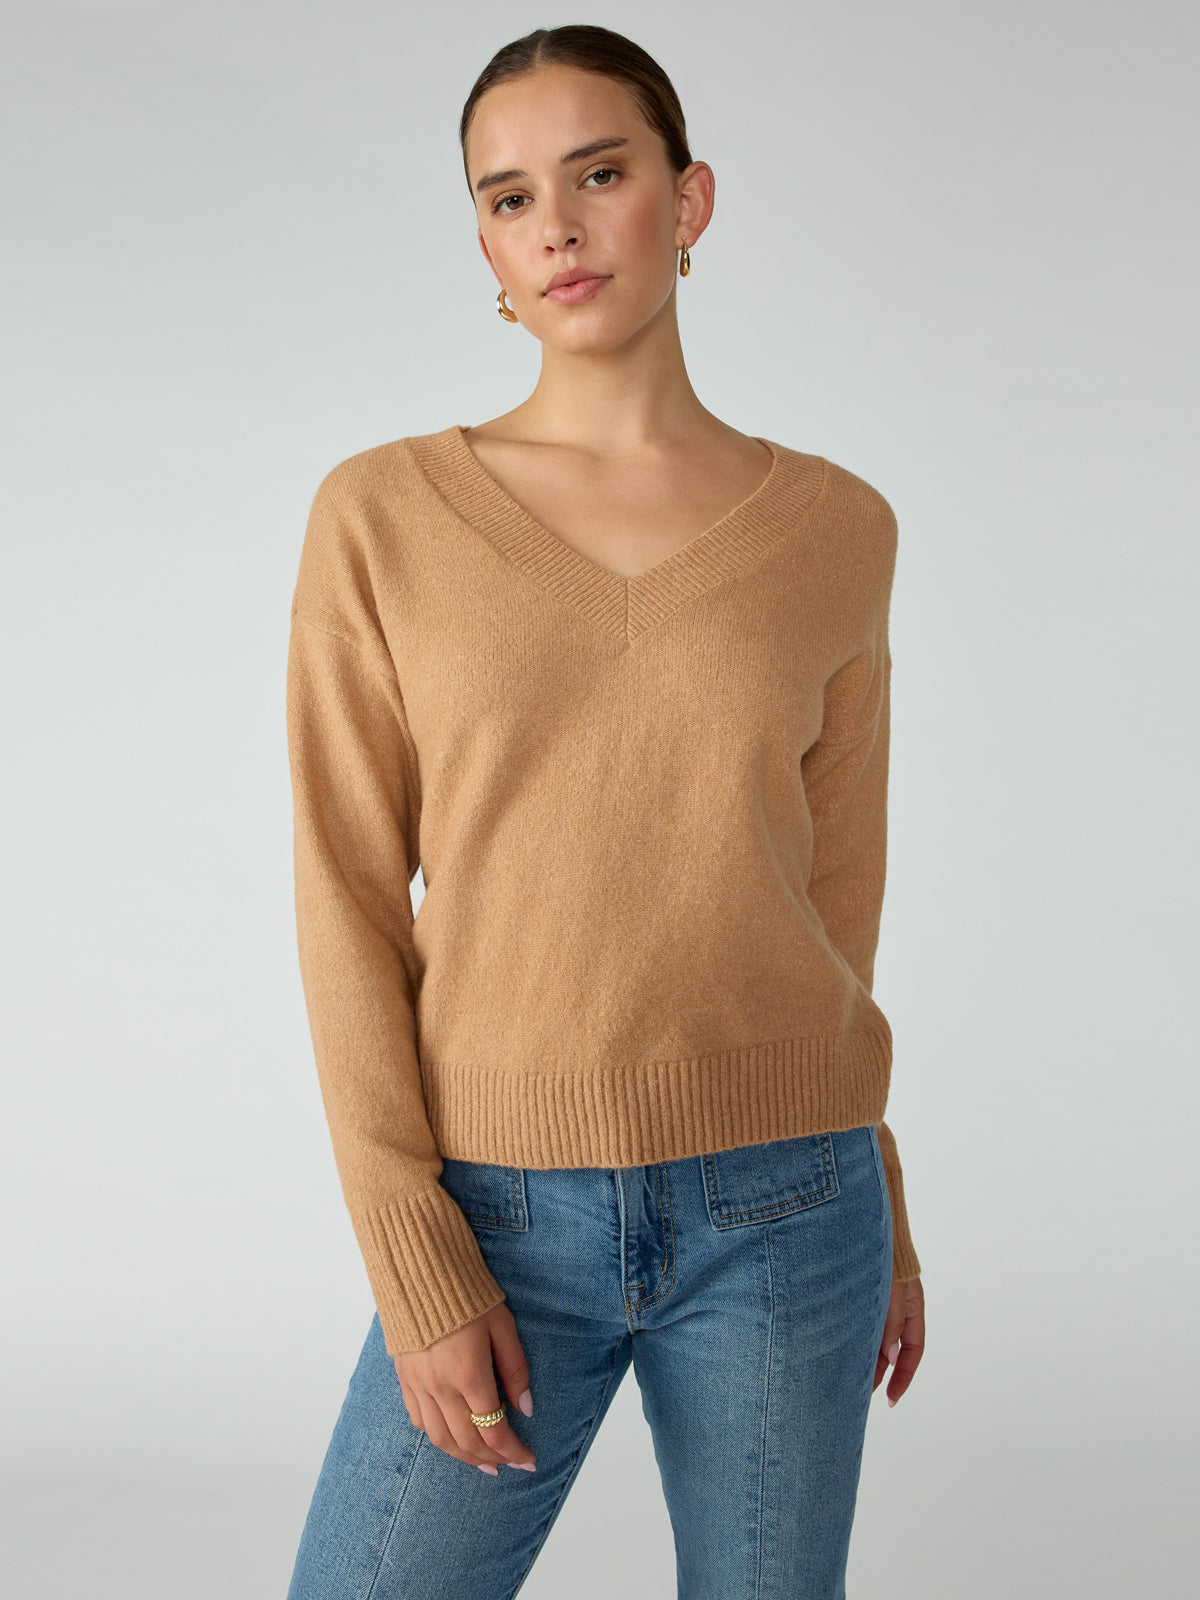 Easy Breezy V-Neck Pullover Sweater Roasted Cappuccino